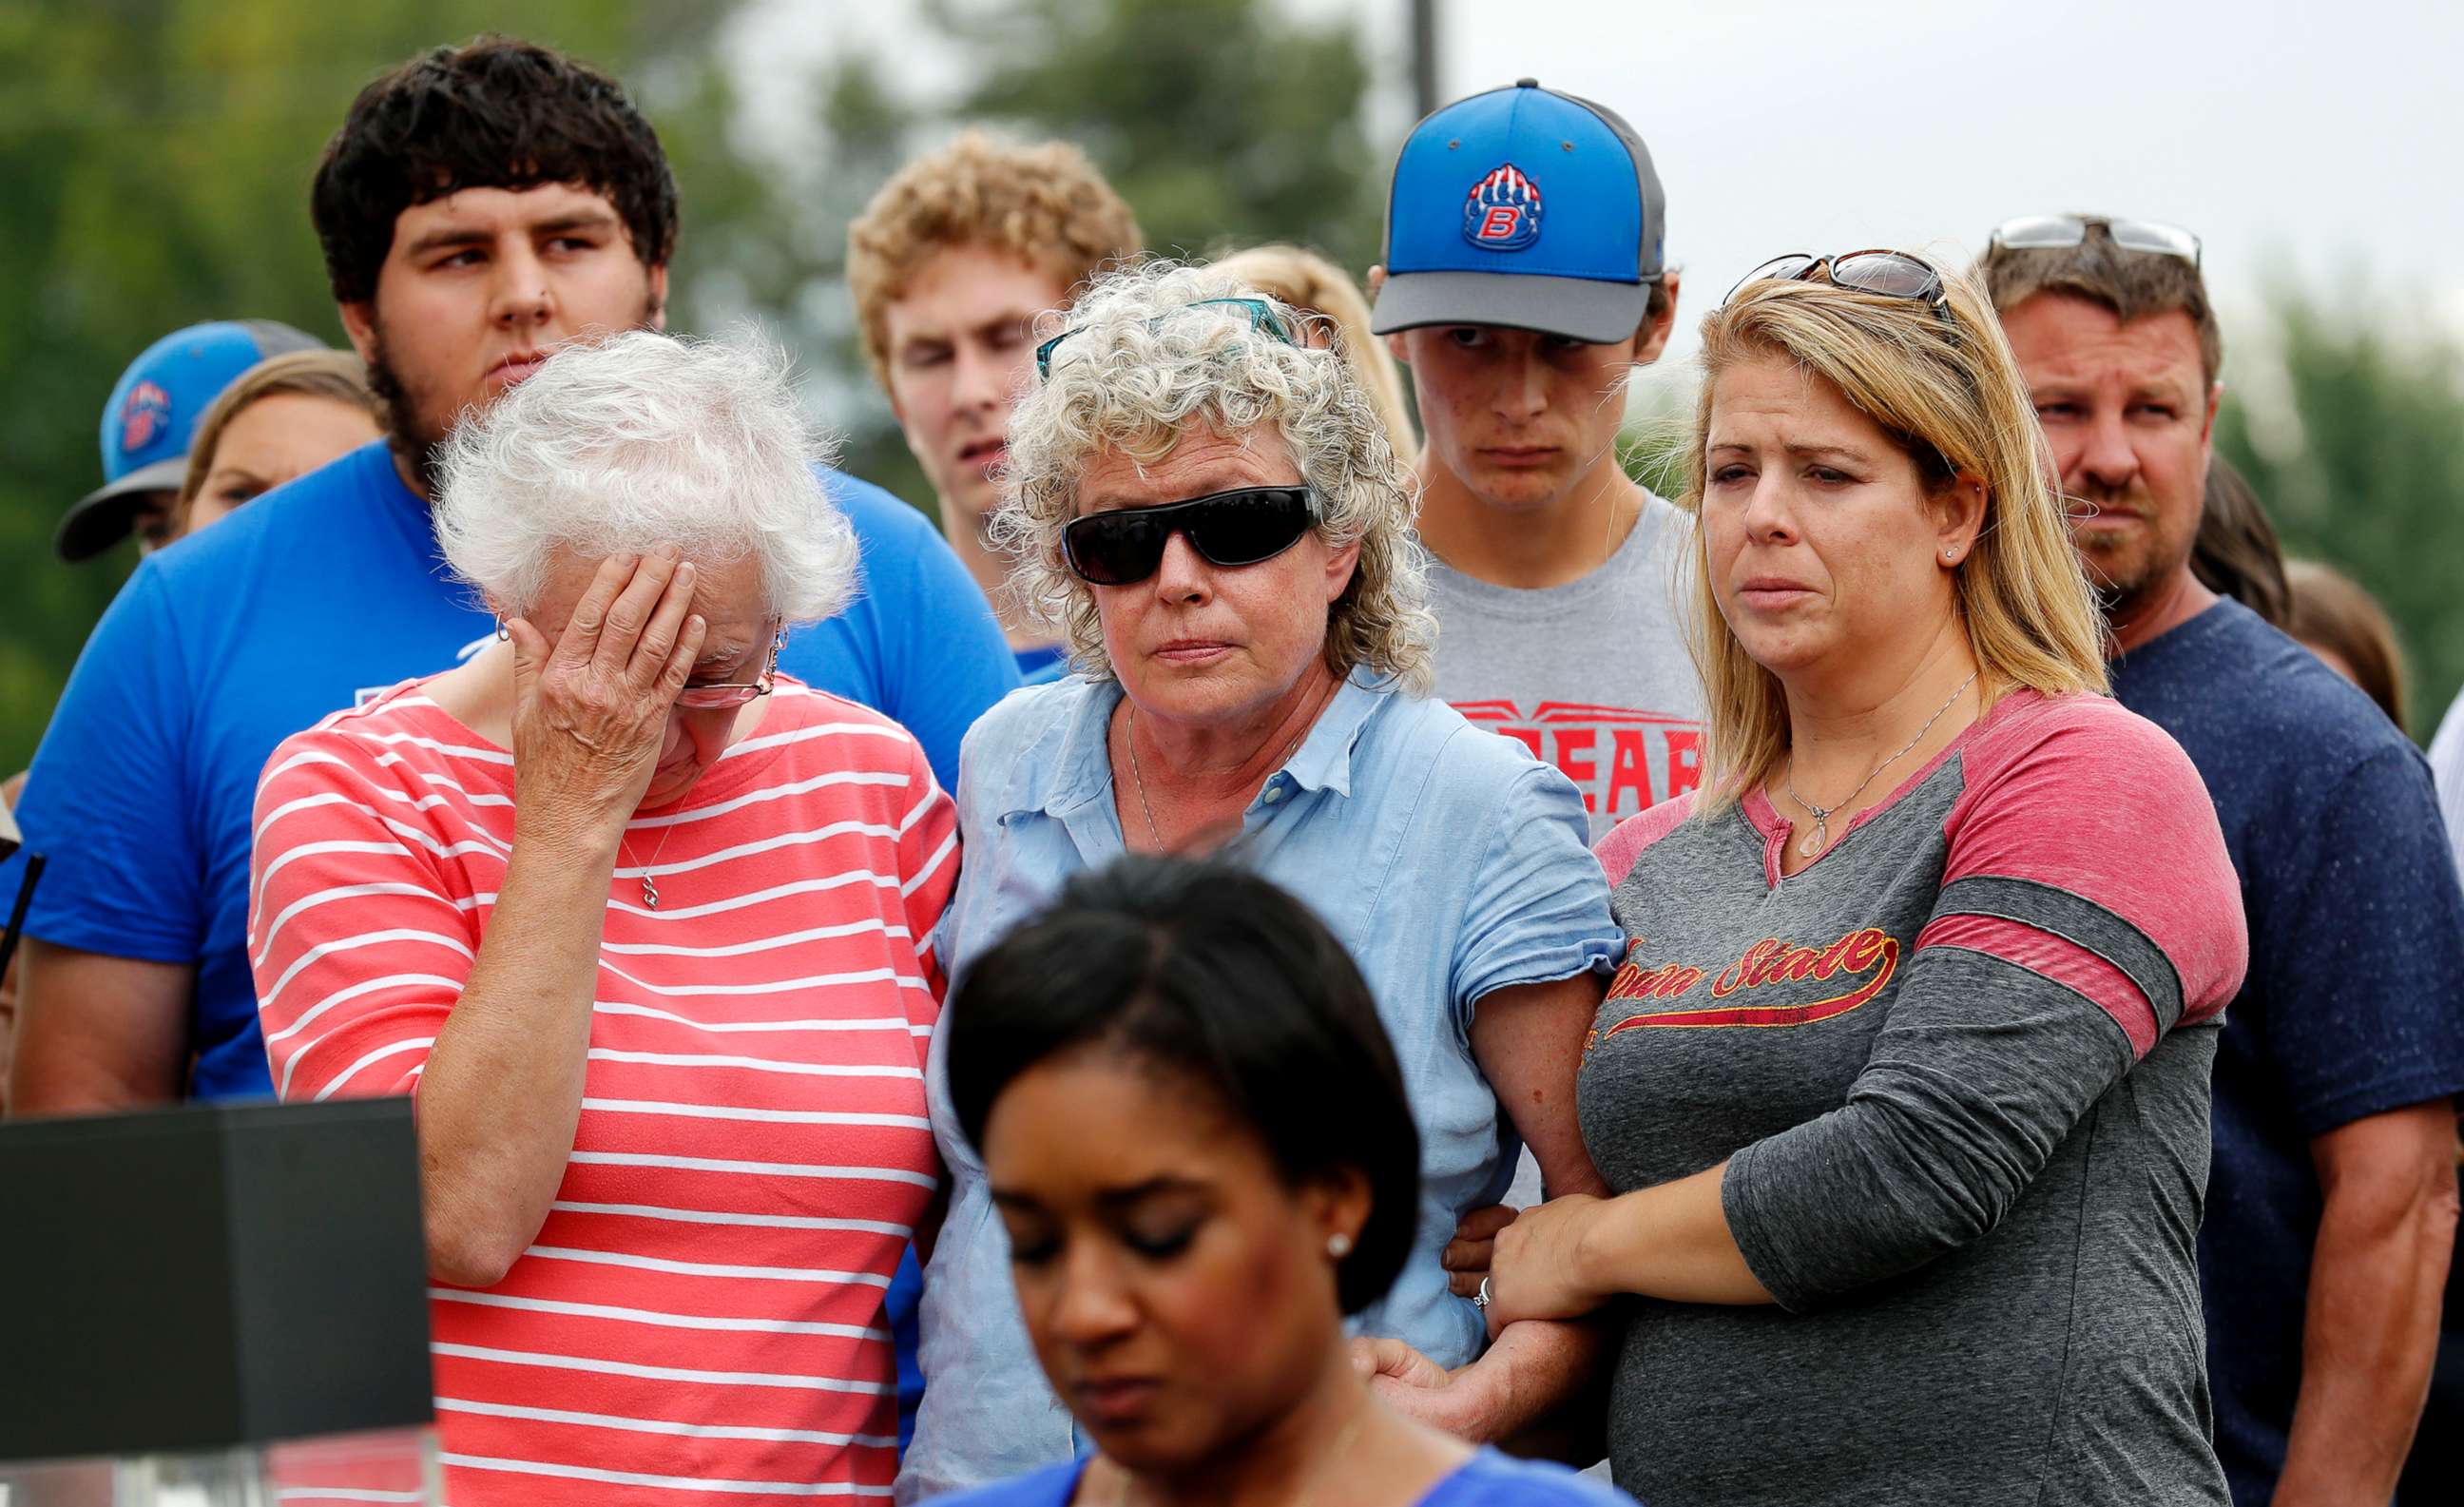 PHOTO: Friends and family of missing University of Iowa student Mollie Tibbetts react during a news conference, Aug. 21, 2018, in Montezuma, Iowa.